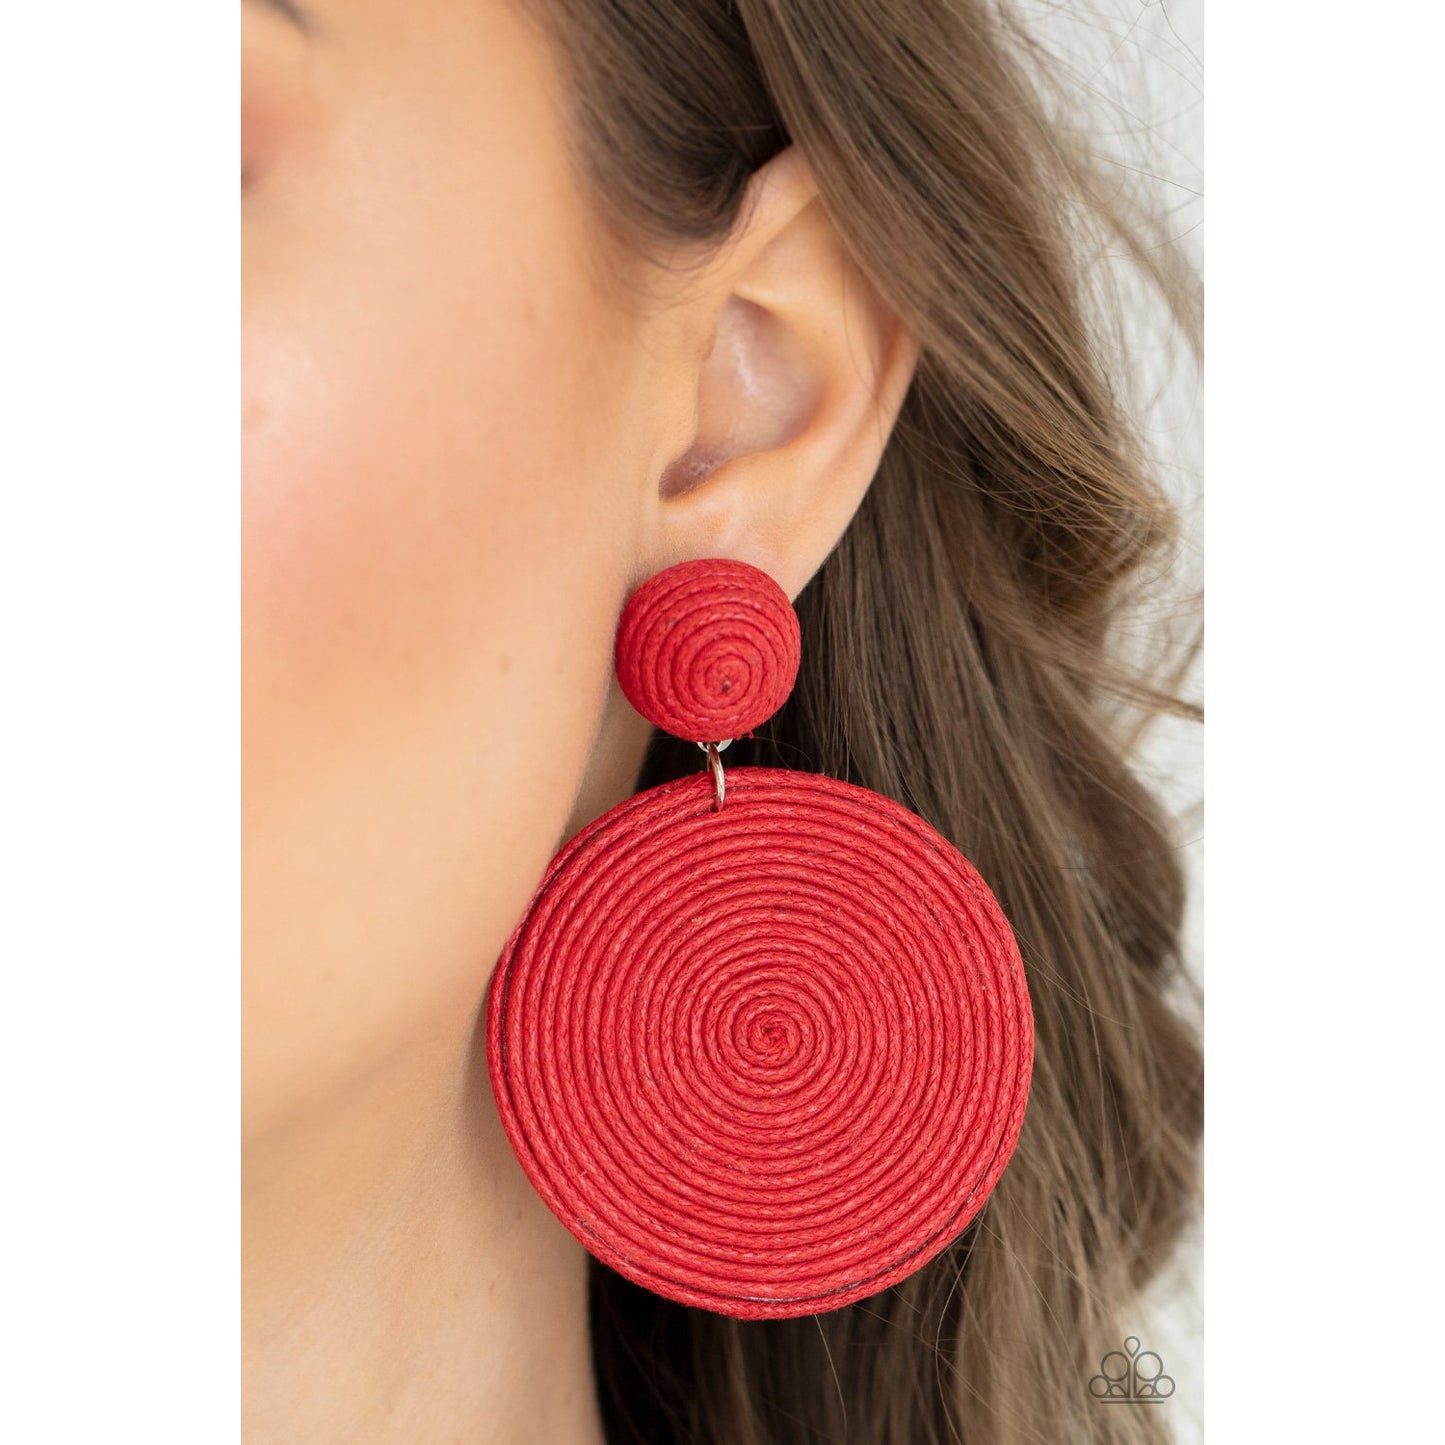 Circulate The Room - Red Earrings - Paparazzi Accessories - GlaMarous Titi Jewels